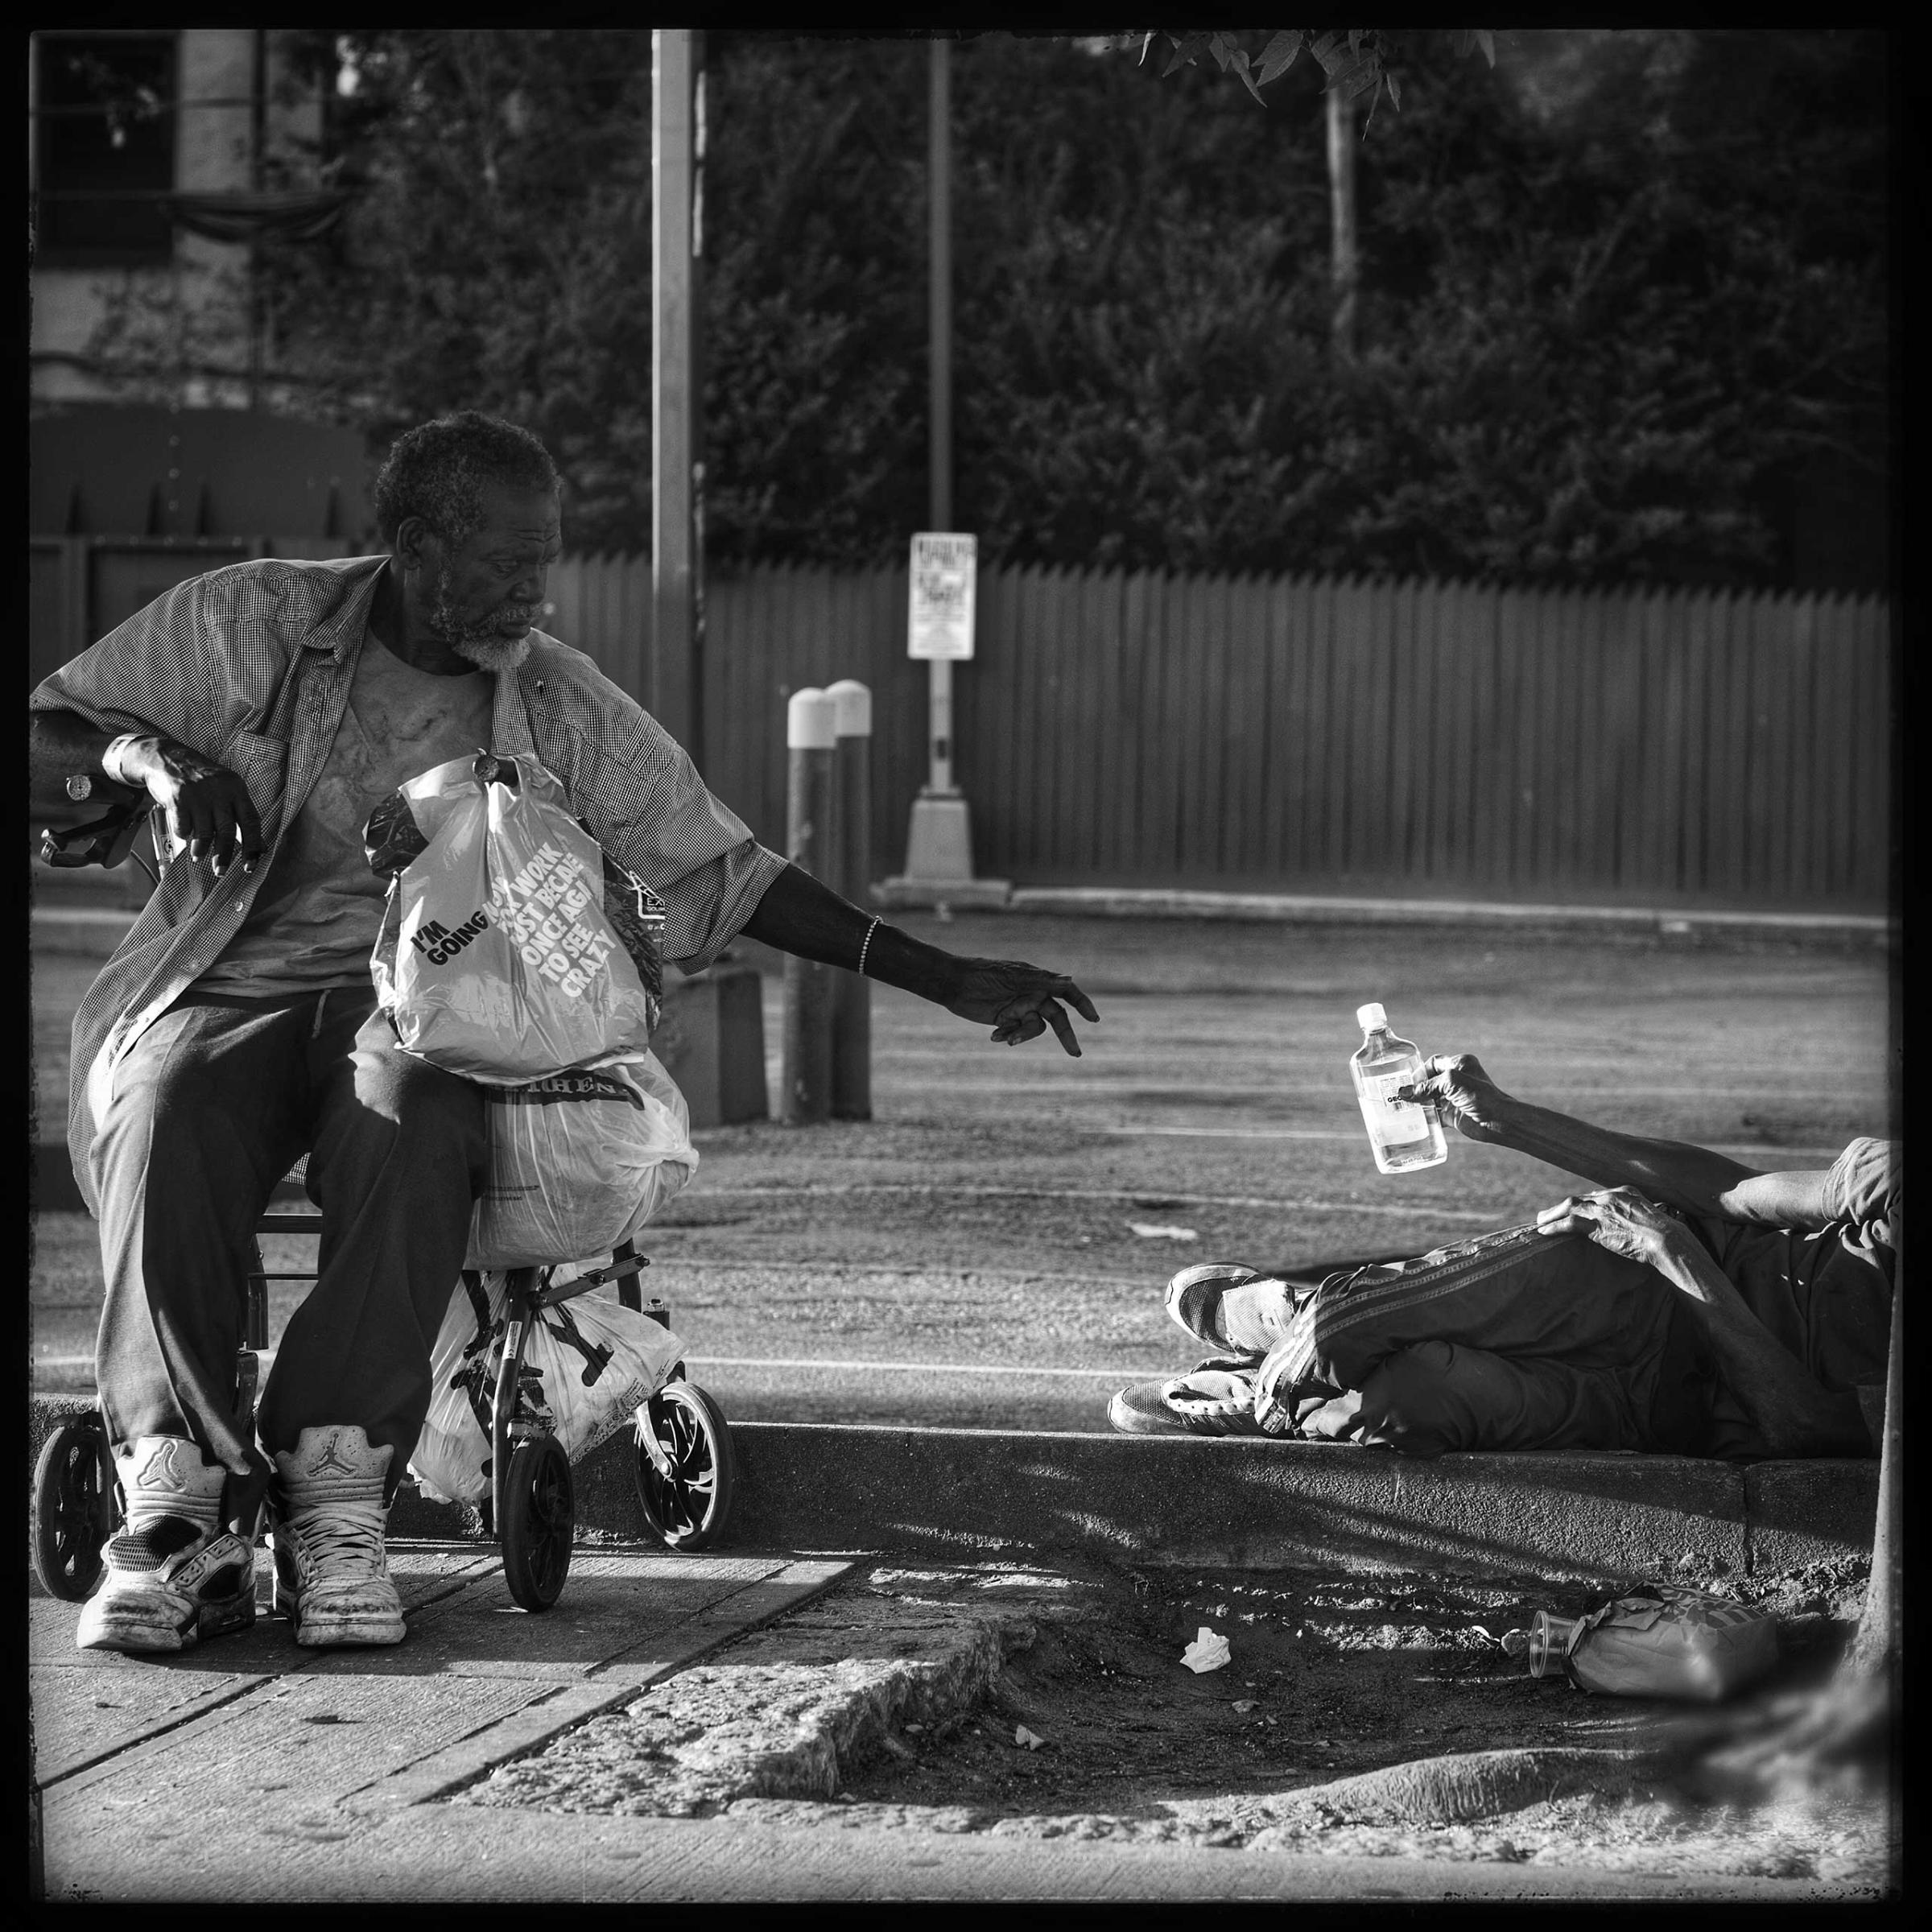 Sharing a drink with a friend. Two elderly gentlemen pass the time by drinking and sharing moments together on Fulton Street in Brooklyn.